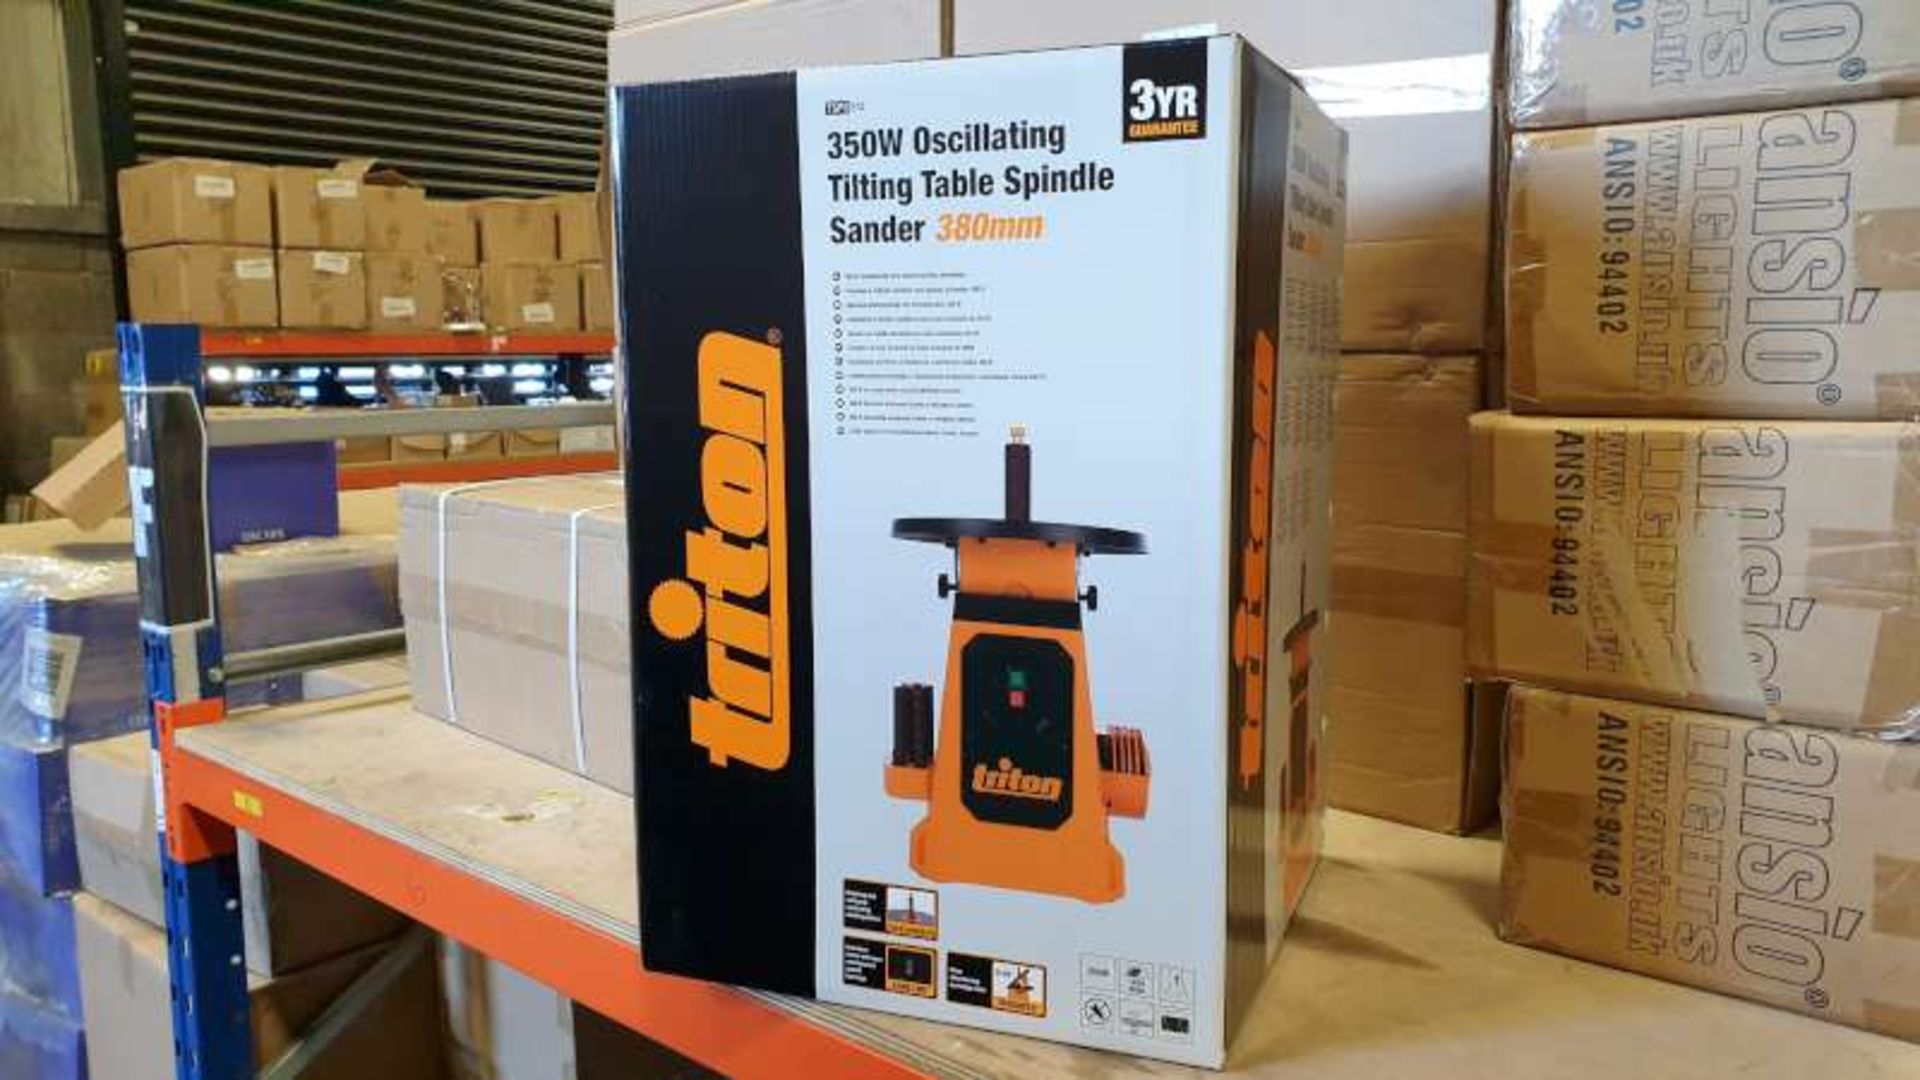 BRAND NEW BOXED TRITON 350W OSCILLATING TILTING TABLE SPINDLE SANDER 380MM WITH 3 YEARS MANUFACTURES